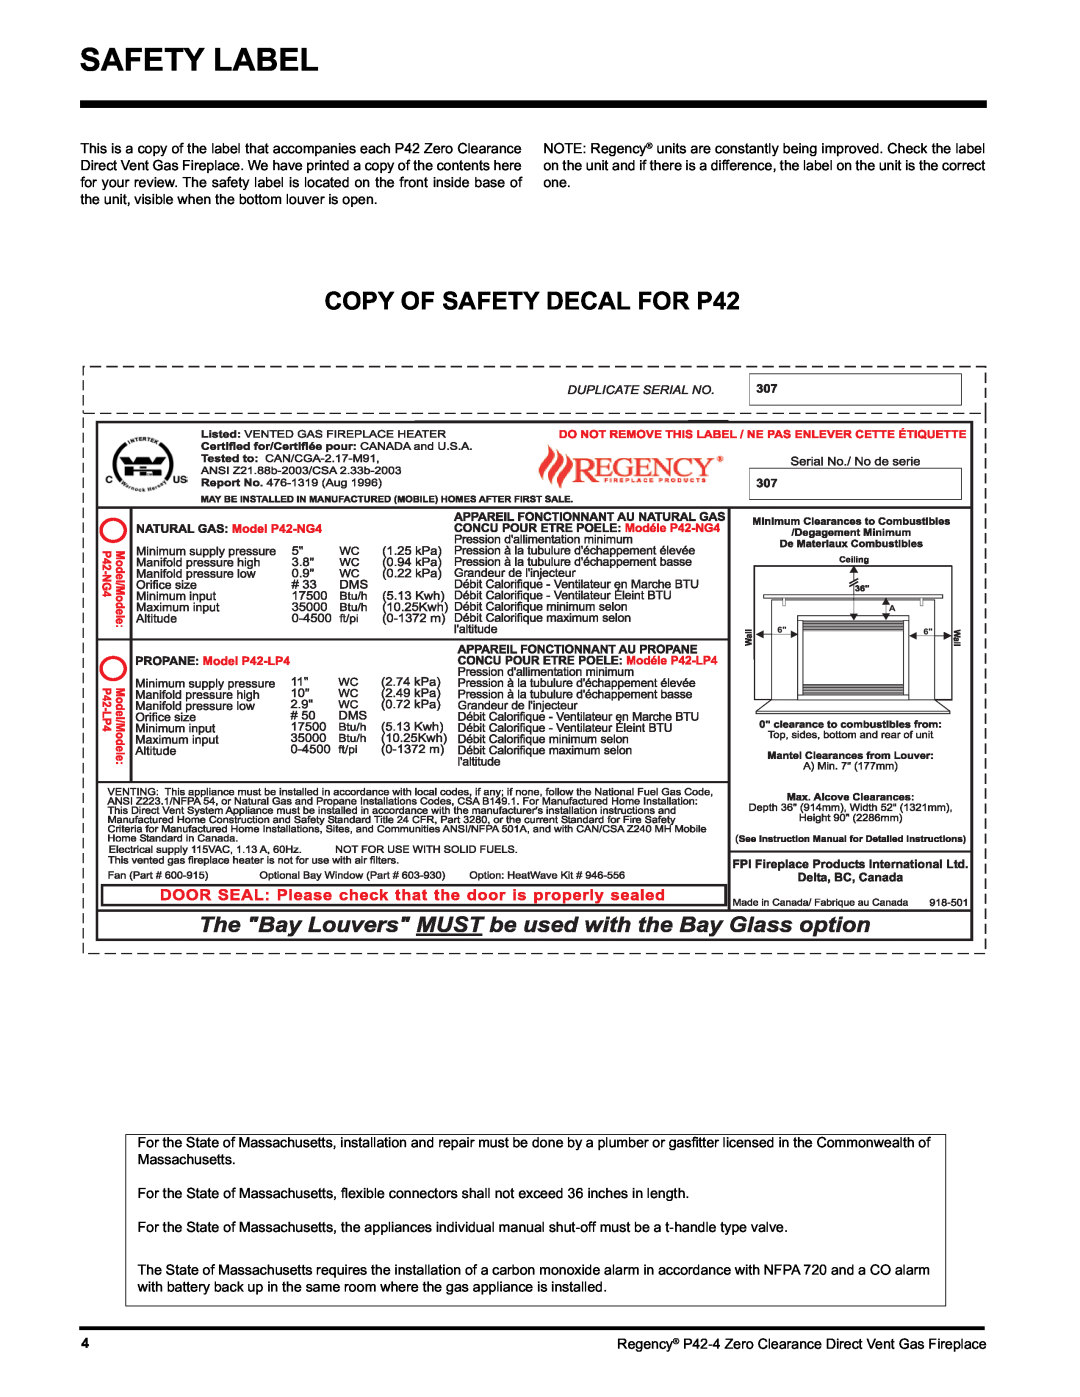 Regency P42-NG4, P42-LP4 installation manual Safety Label, COPY OF SAFETY DECAL FOR P42 